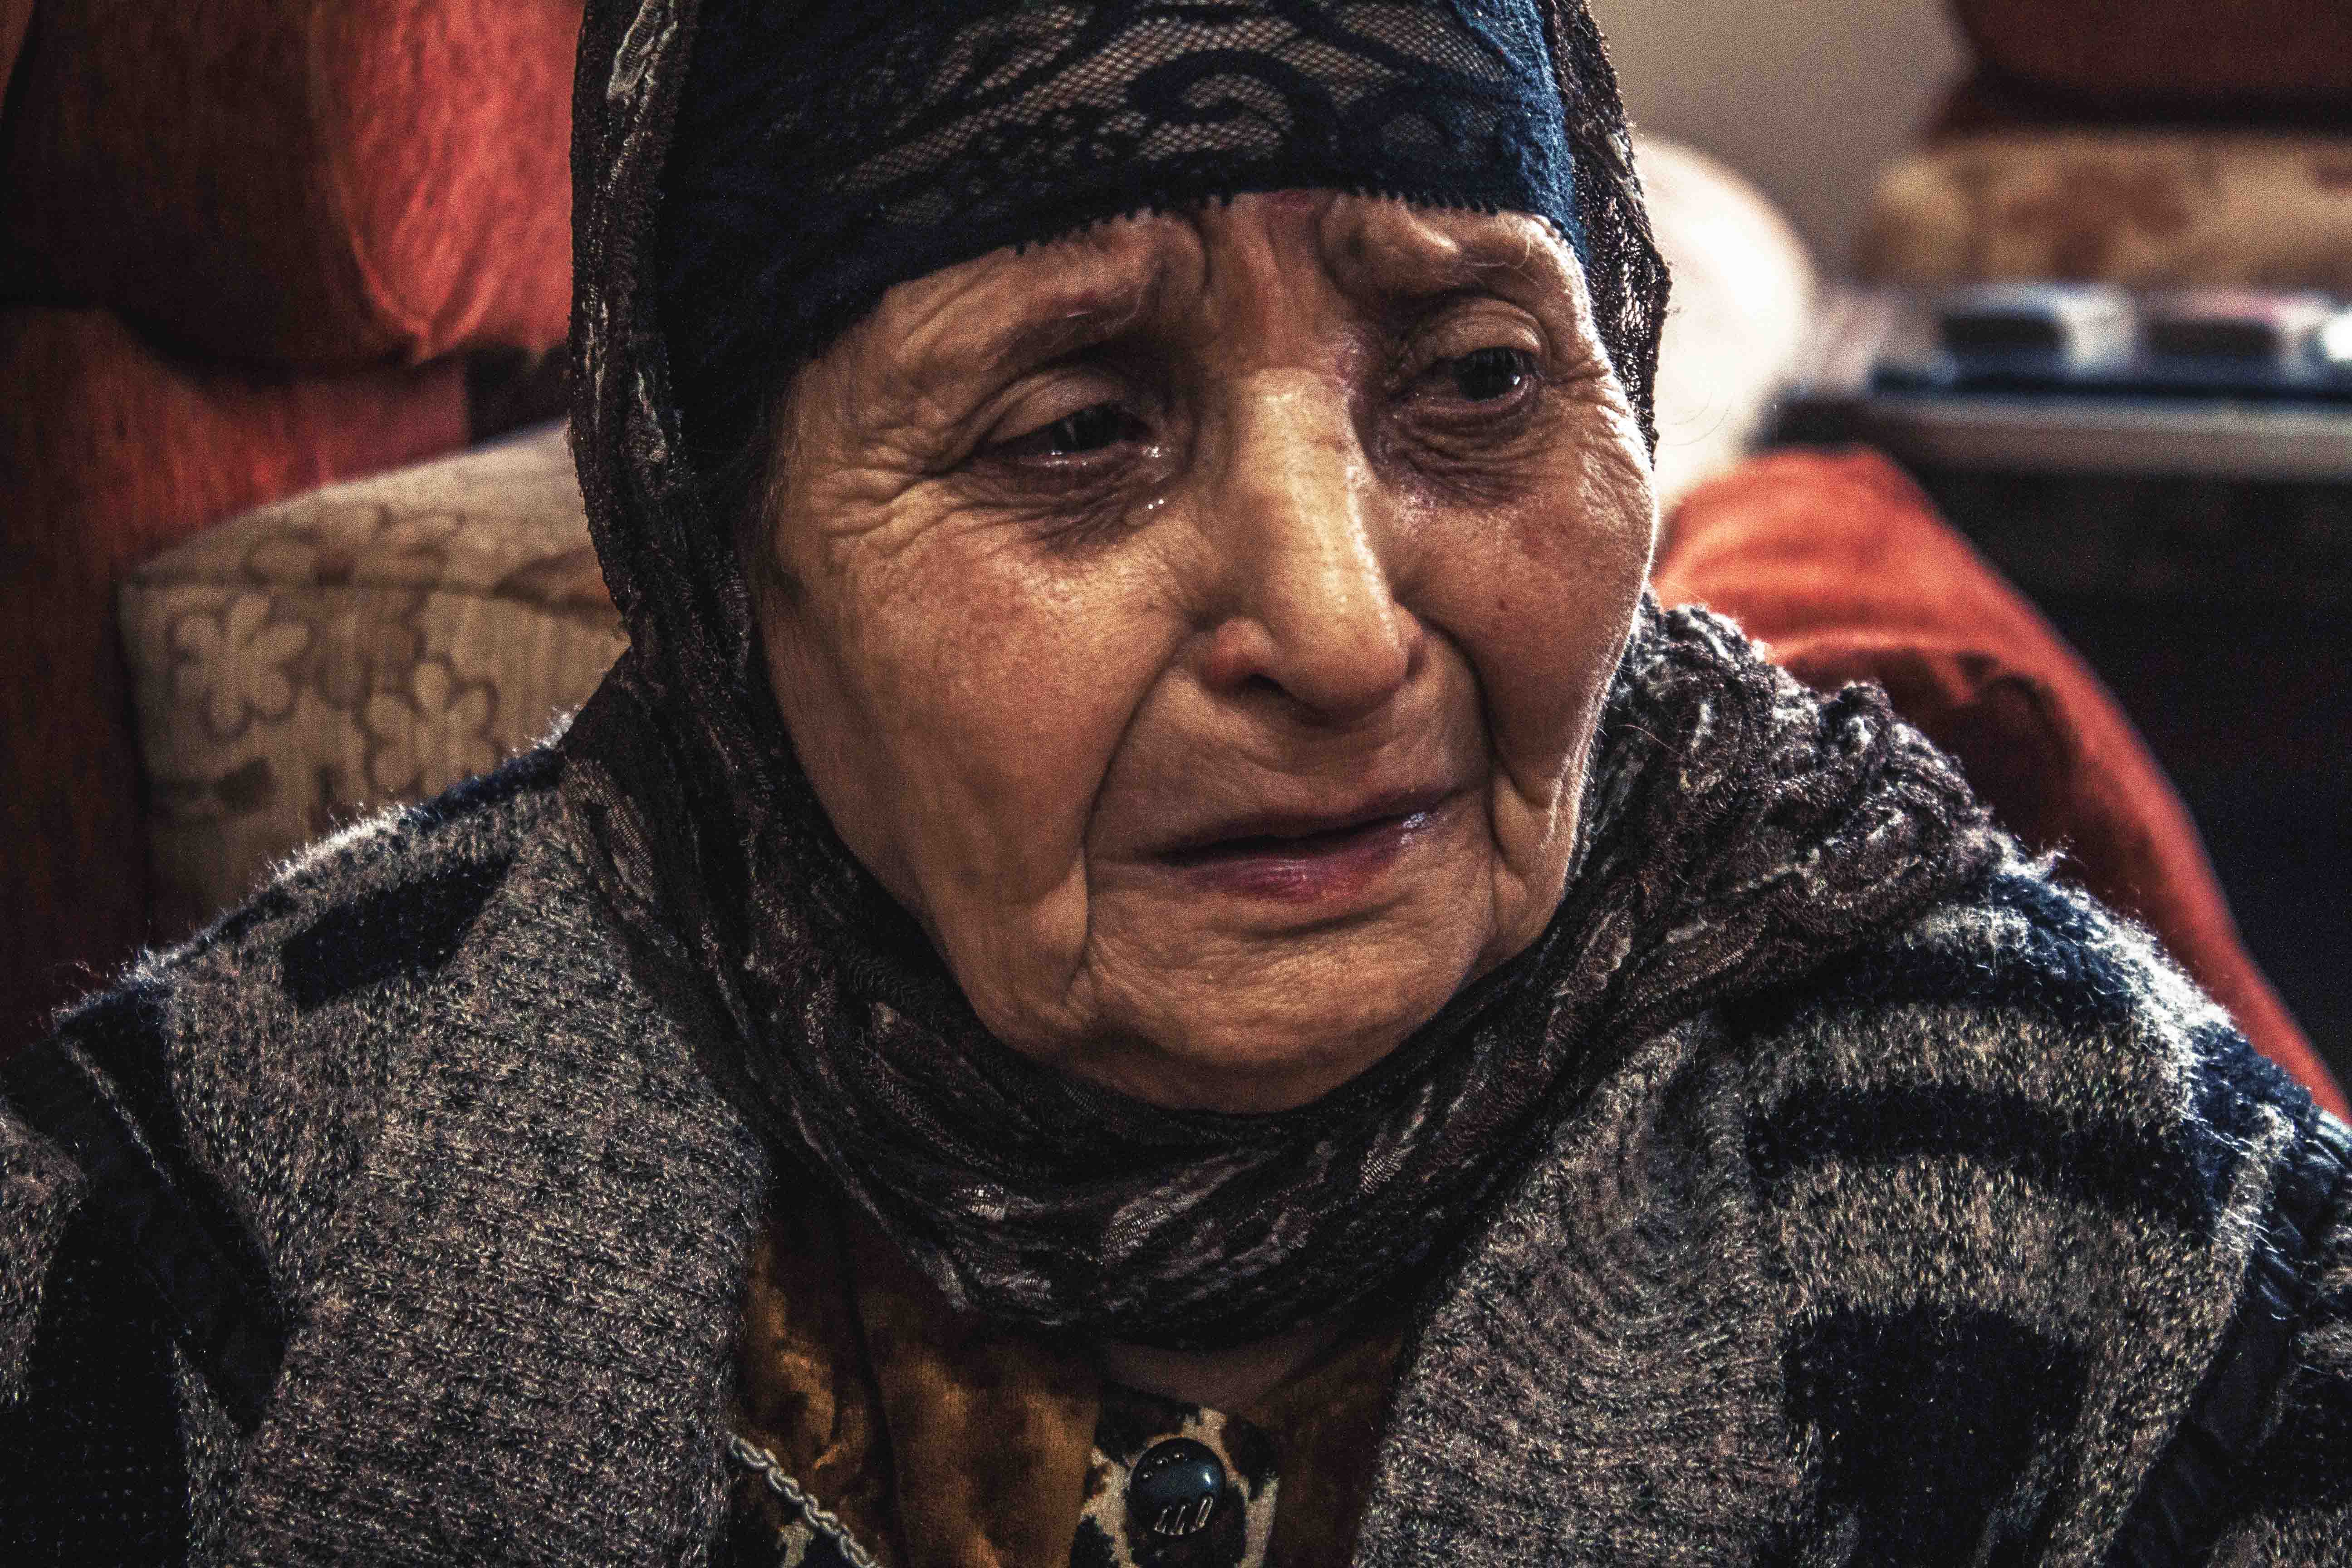 Warda, 85, is a Syrian refugee living in Lebanon.